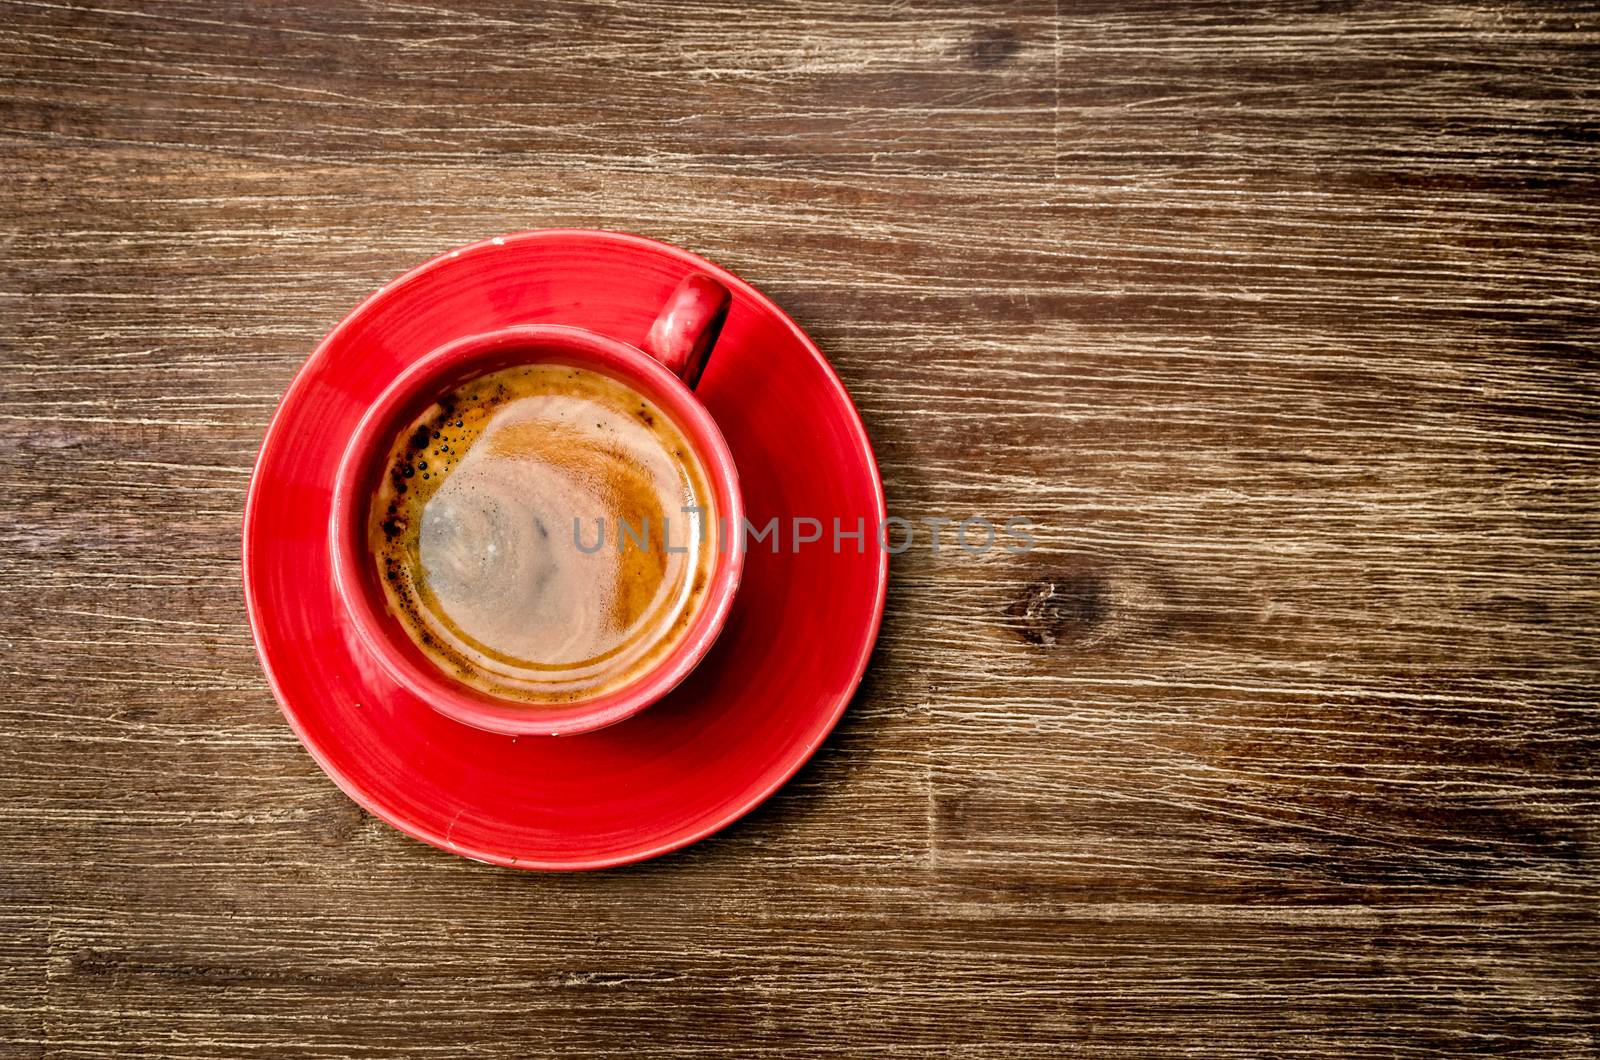 View of coffee in red cup on wooden vintage table by martinm303